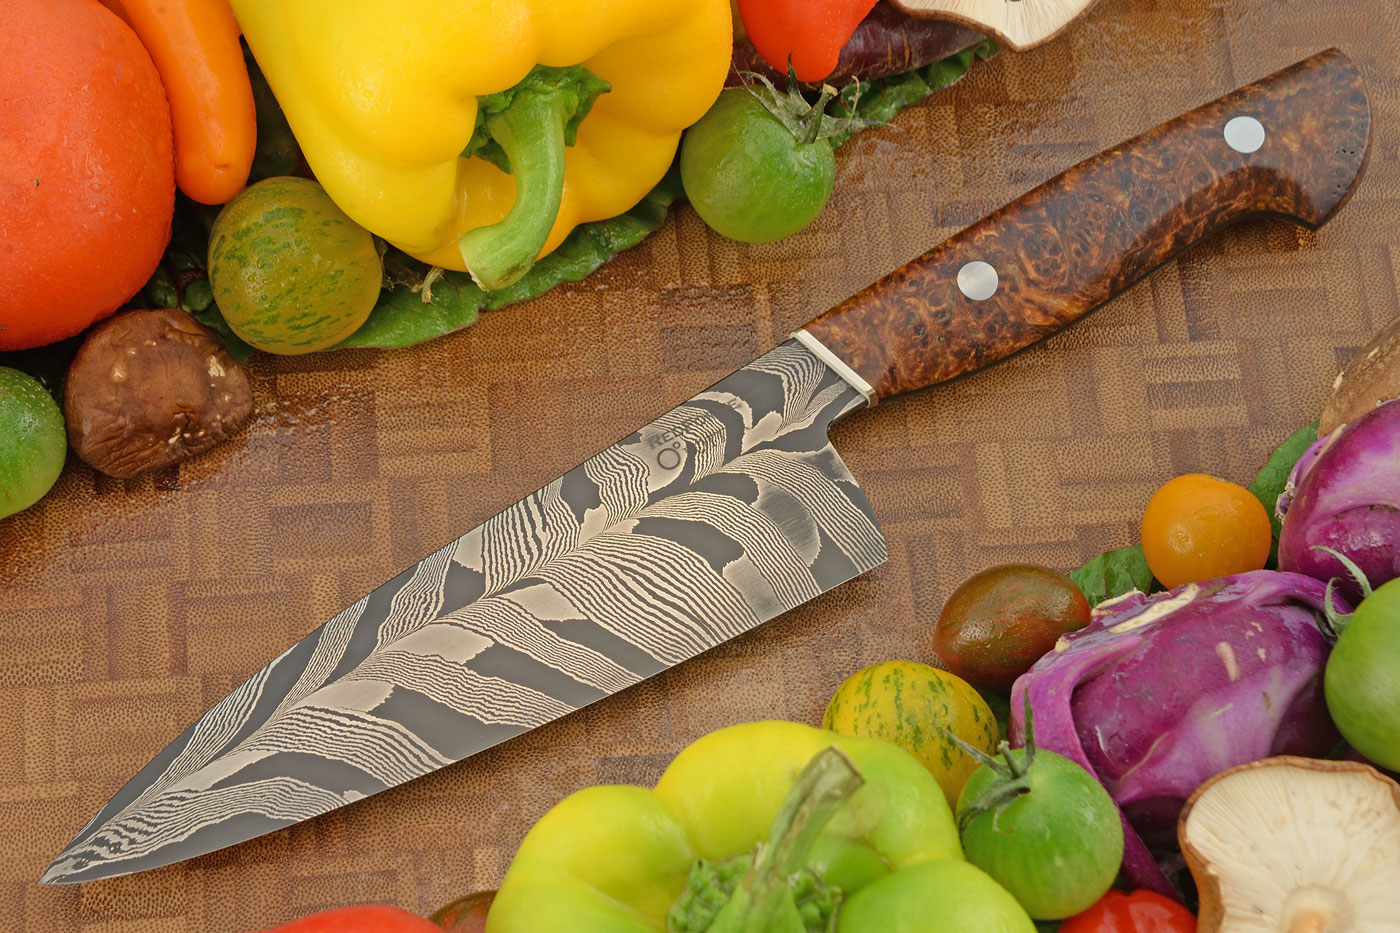 Mosaic Damascus Chef's Knife (6-2/3 in.) with Maple Burl